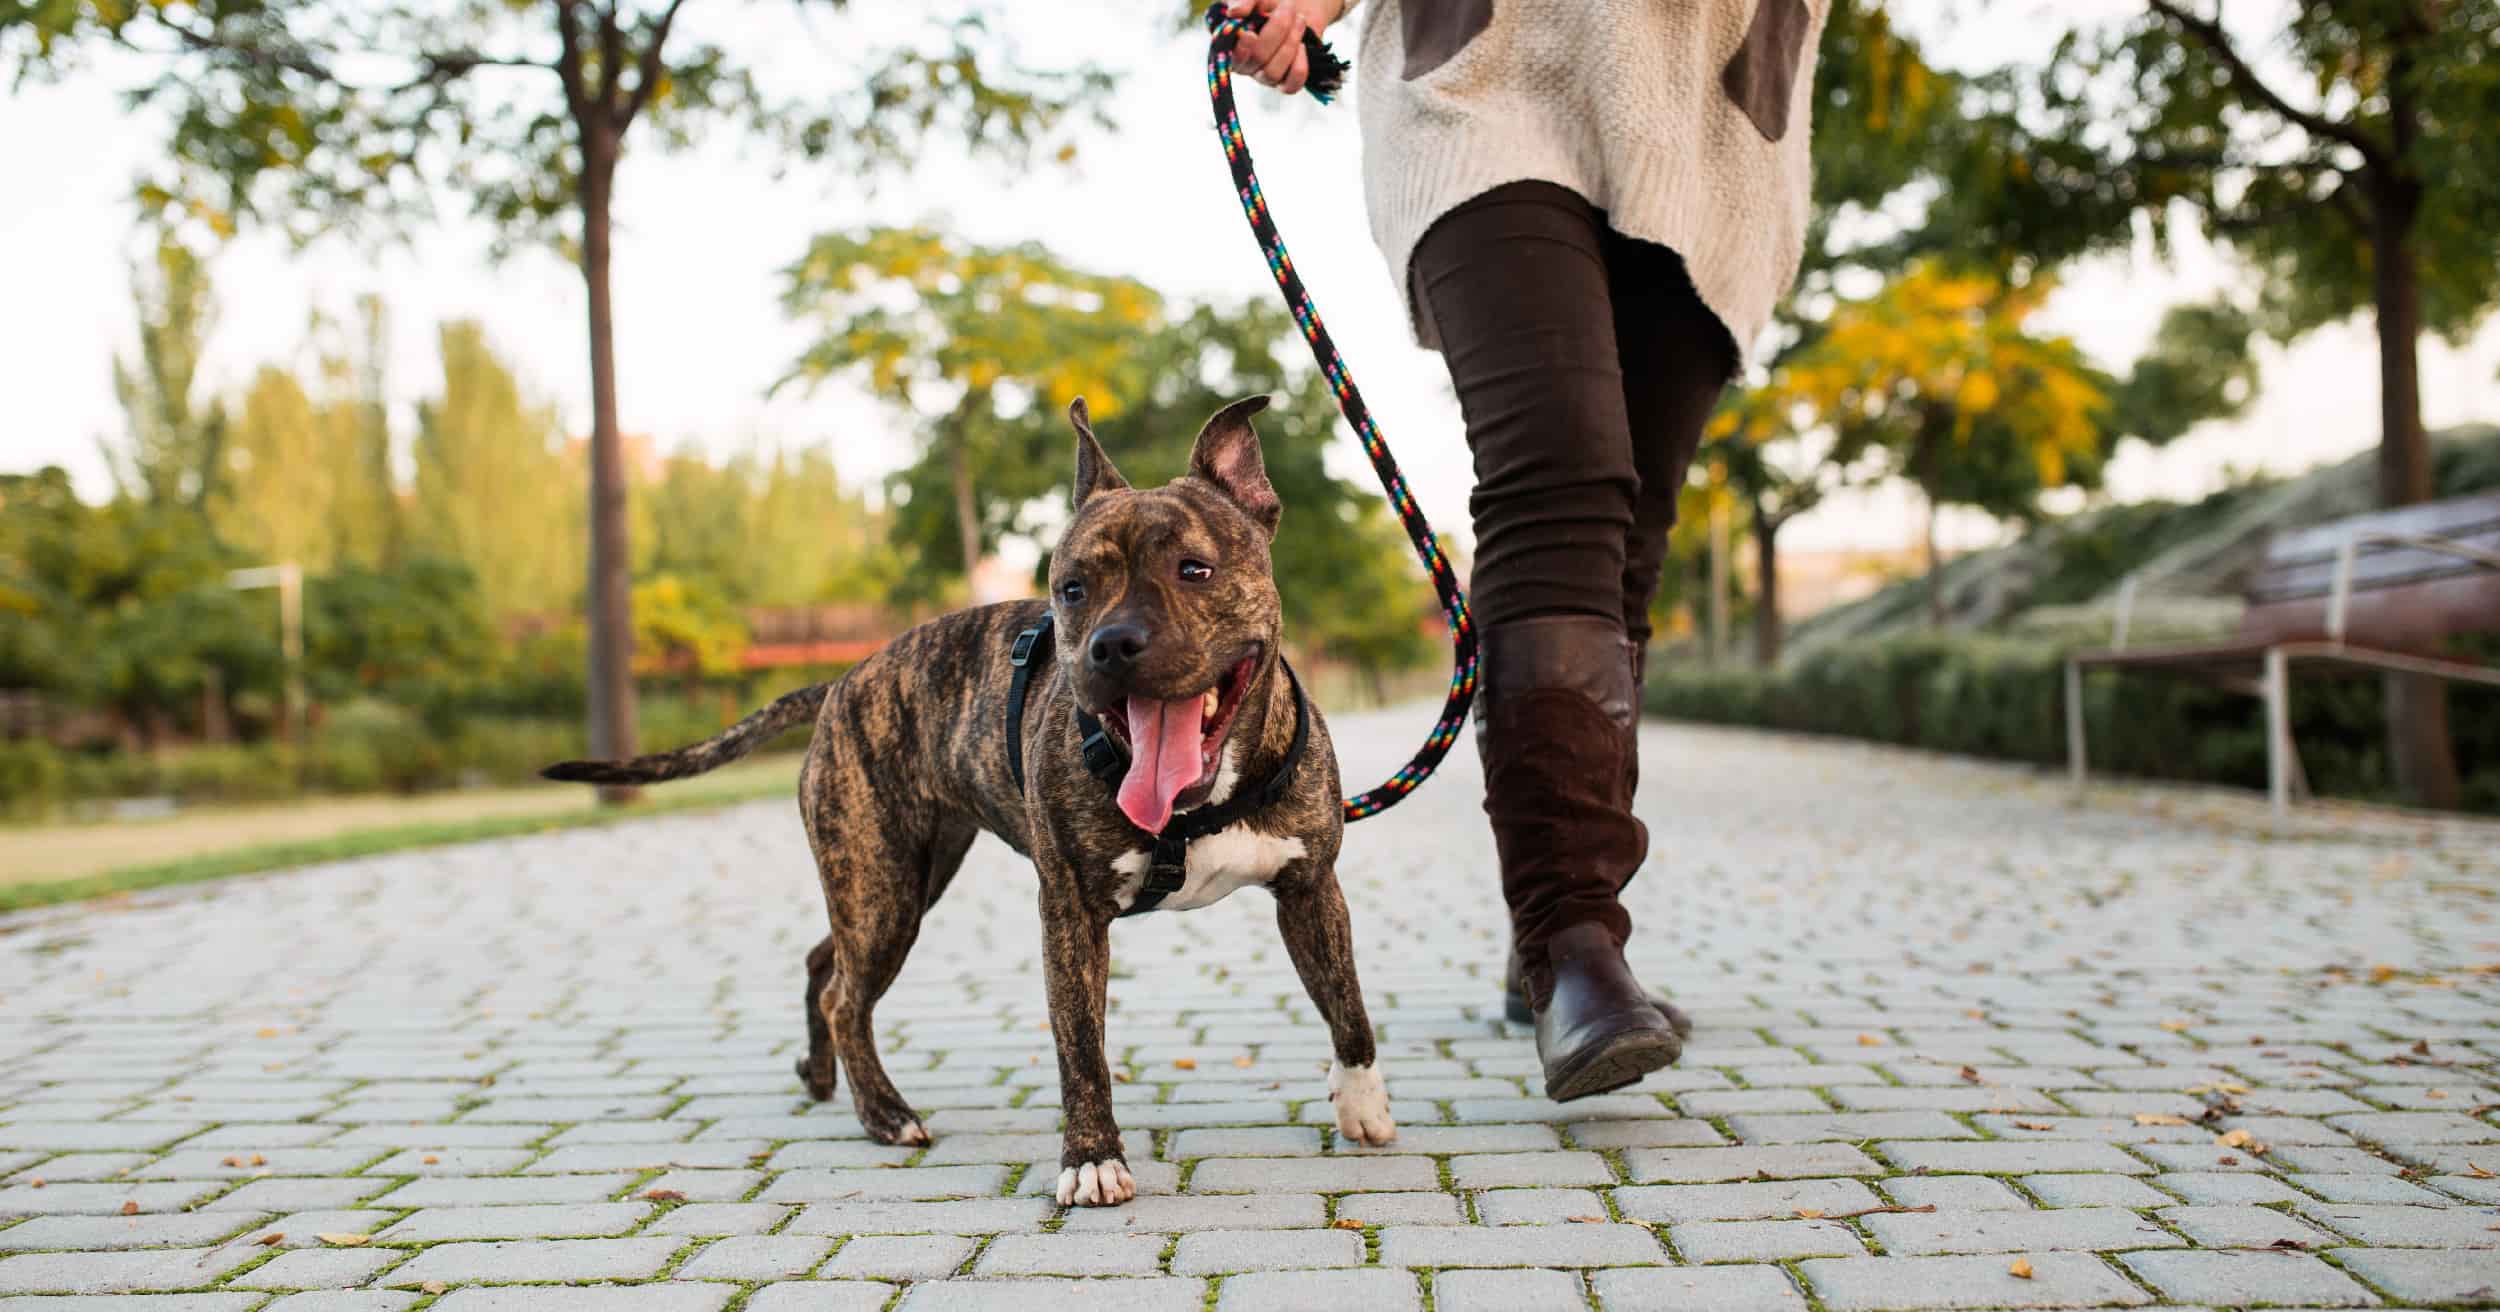 A dog on a leash walking with its owner through a park.